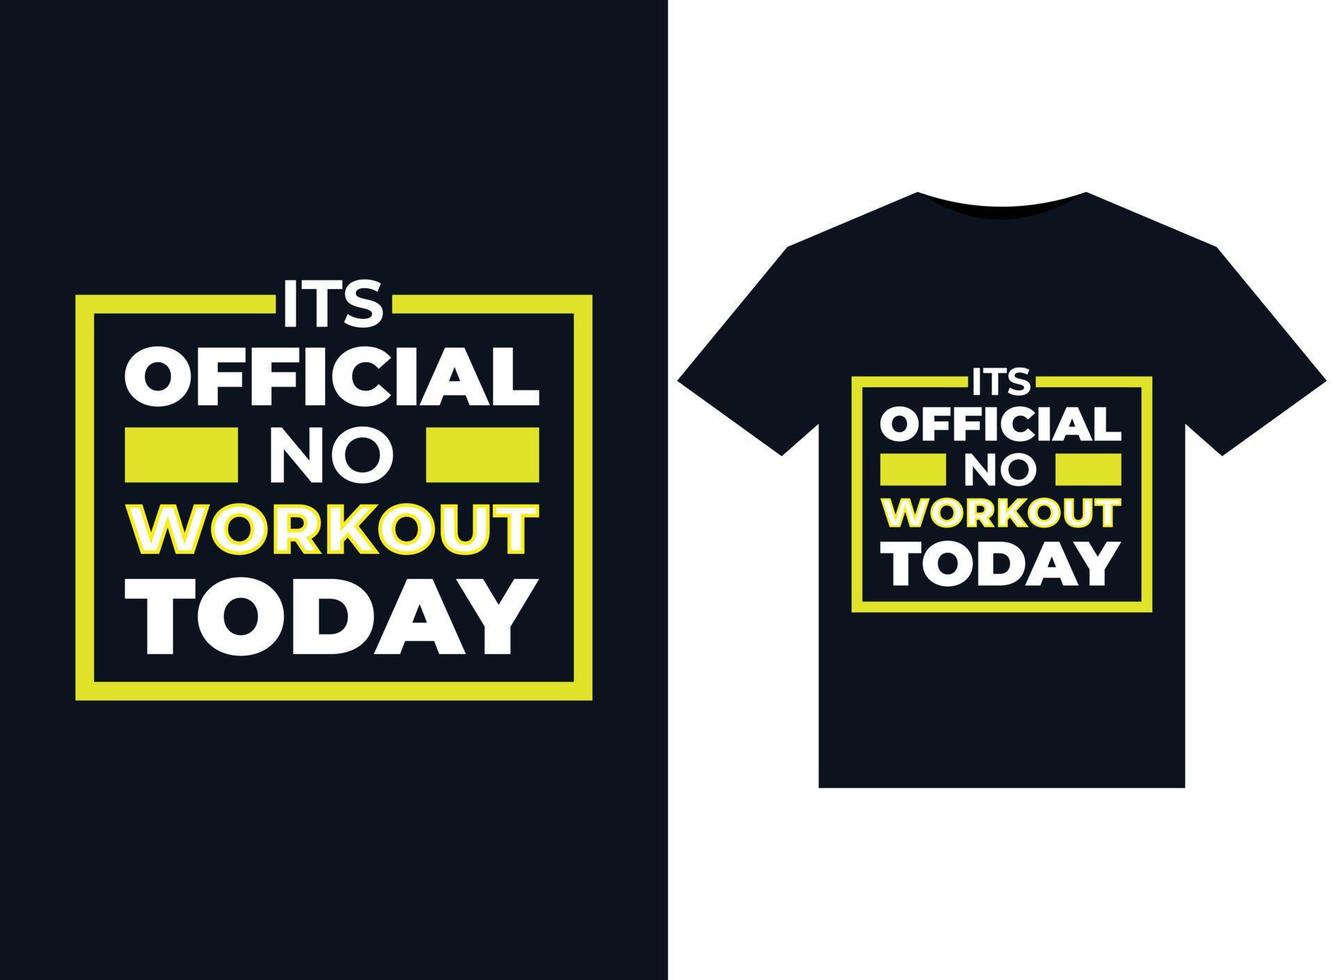 Its Official No Workout Today illustrations for print-ready T-Shirts design vector